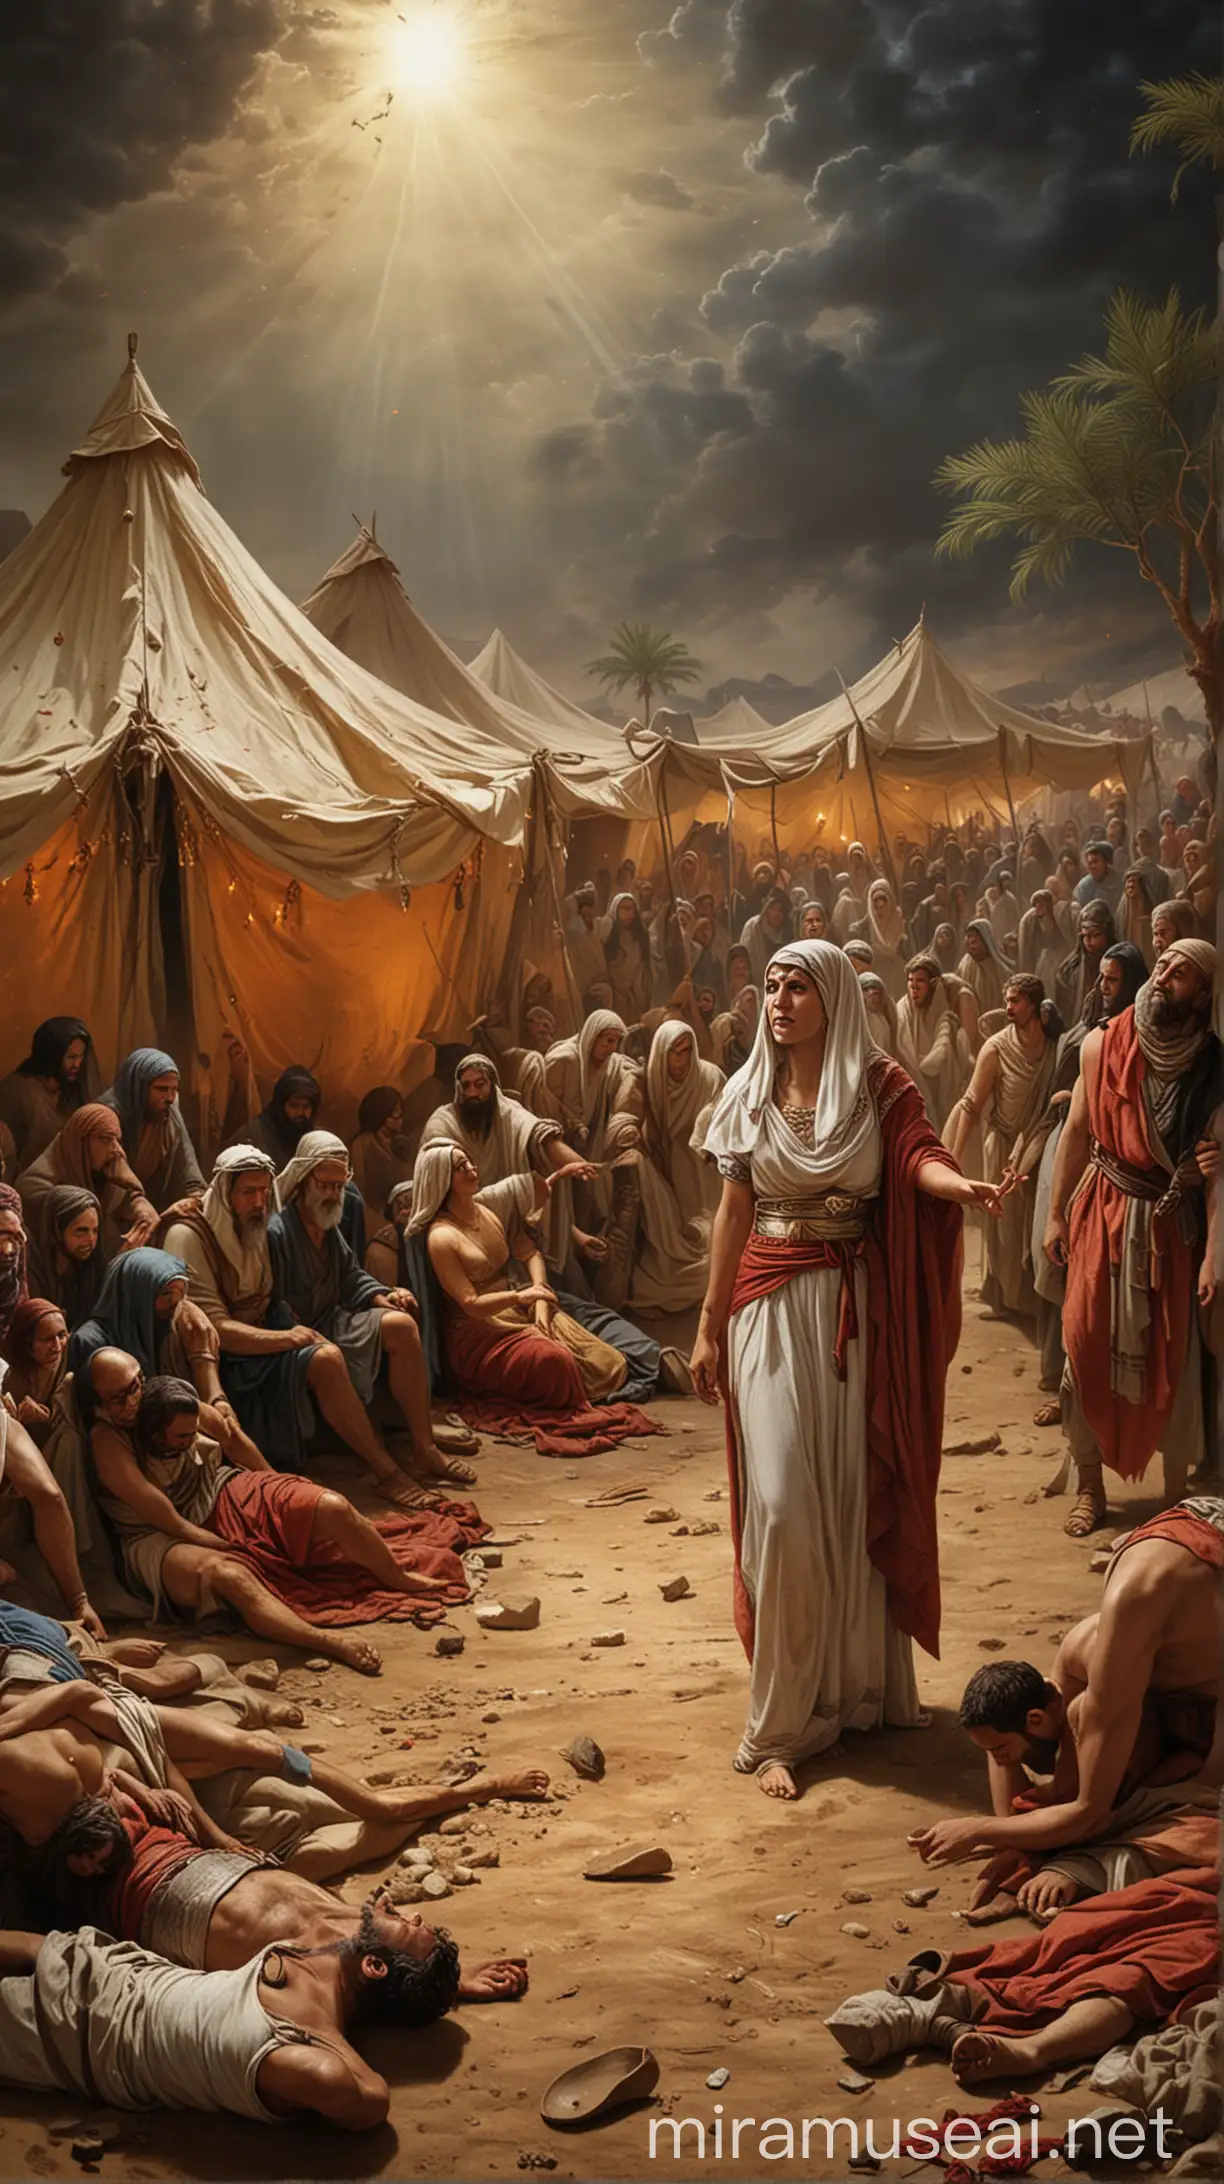 Depict the aftermath with Barak arriving at Jael's tent. Jael should be seen showing Barak the body of Sisera, signifying the fulfillment of Deborah's prophecy."In ancient world 